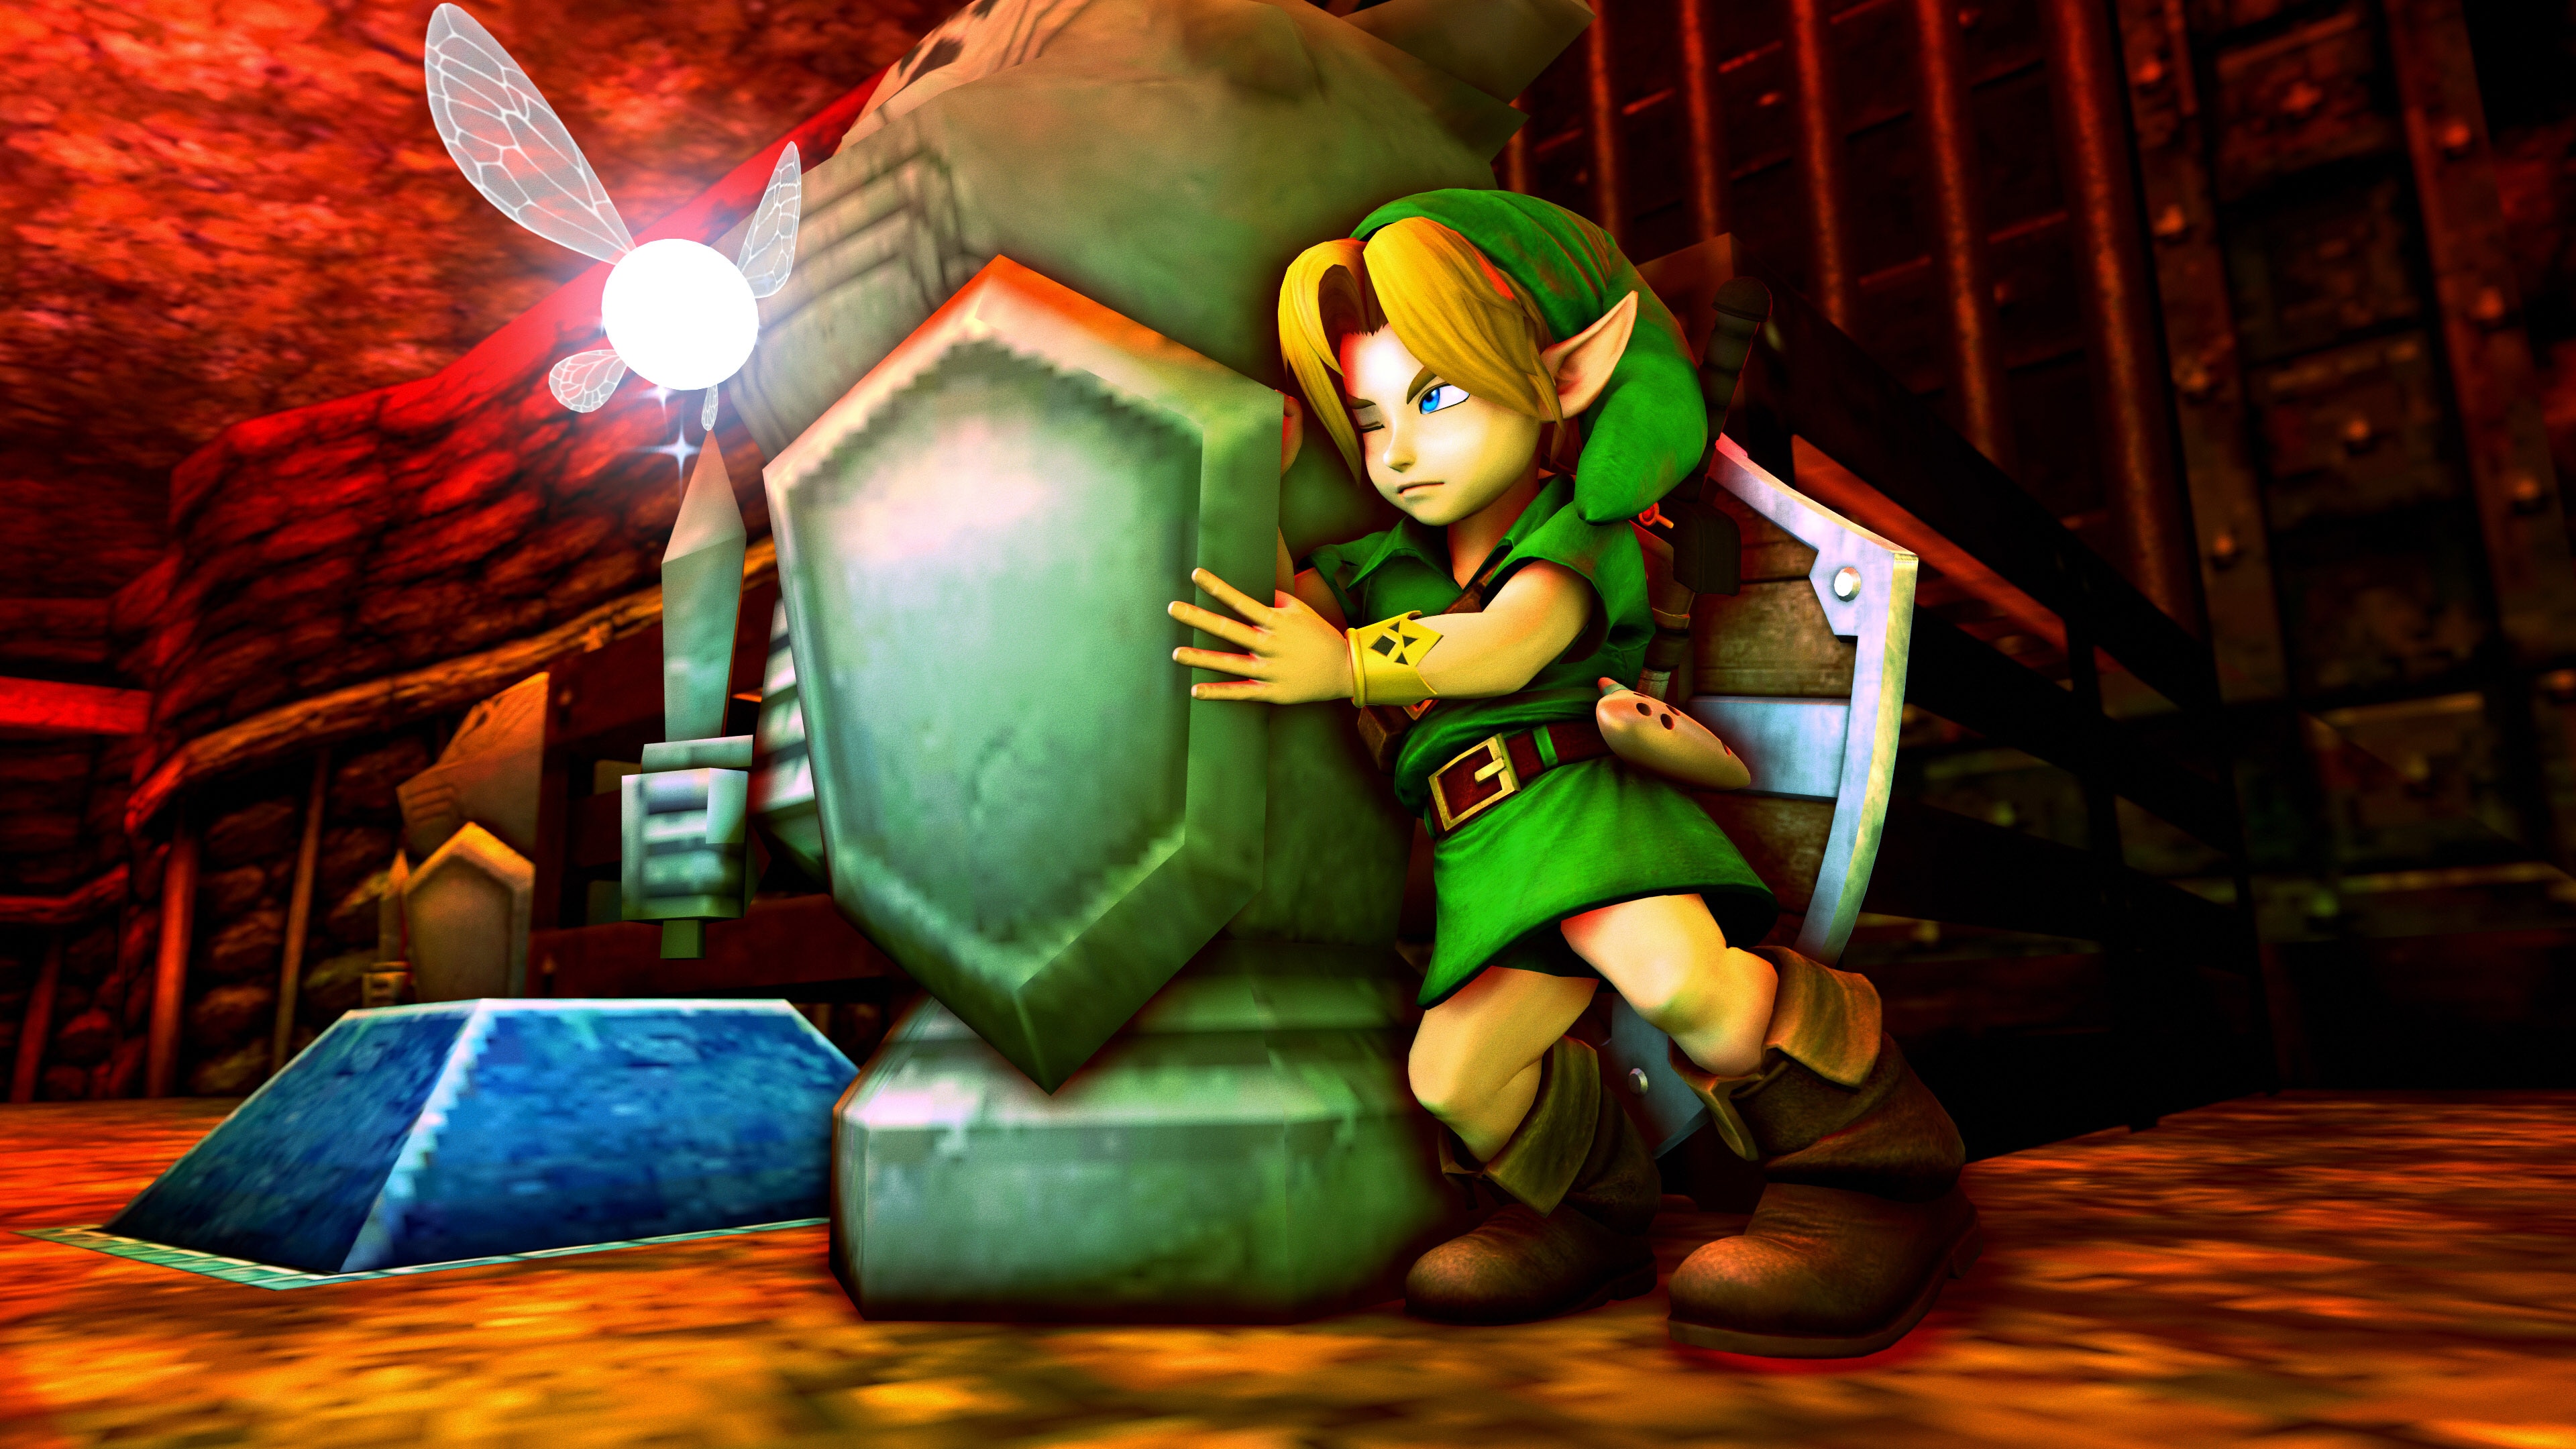 3DS - The Legend of Zelda: Ocarina of Time 3D - Mido - The Models Resource